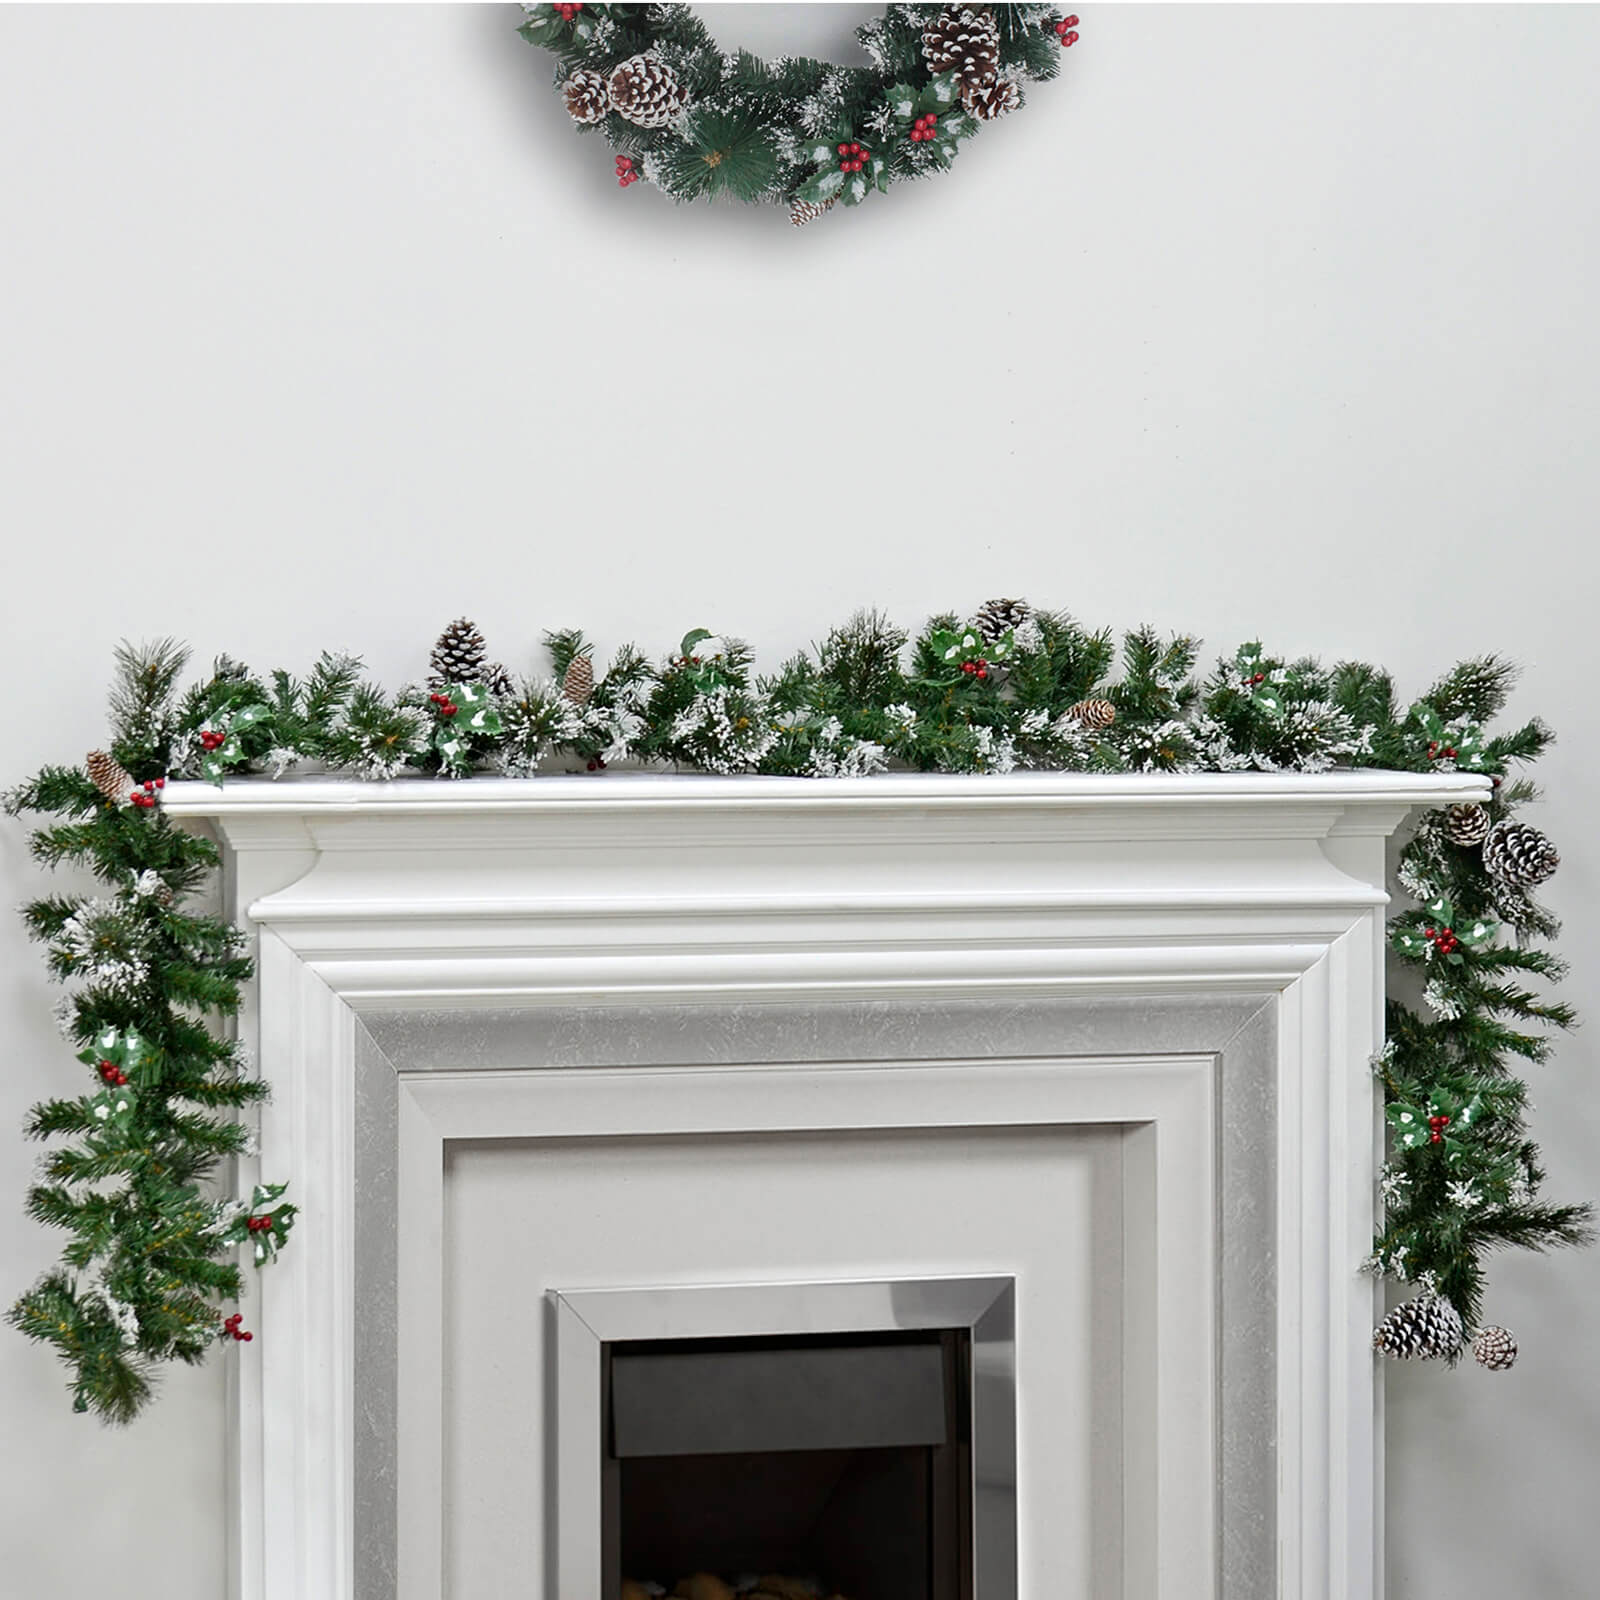 Luxury Frosted pine Christmas garland with pine cones and red berries on a white mantelpiece